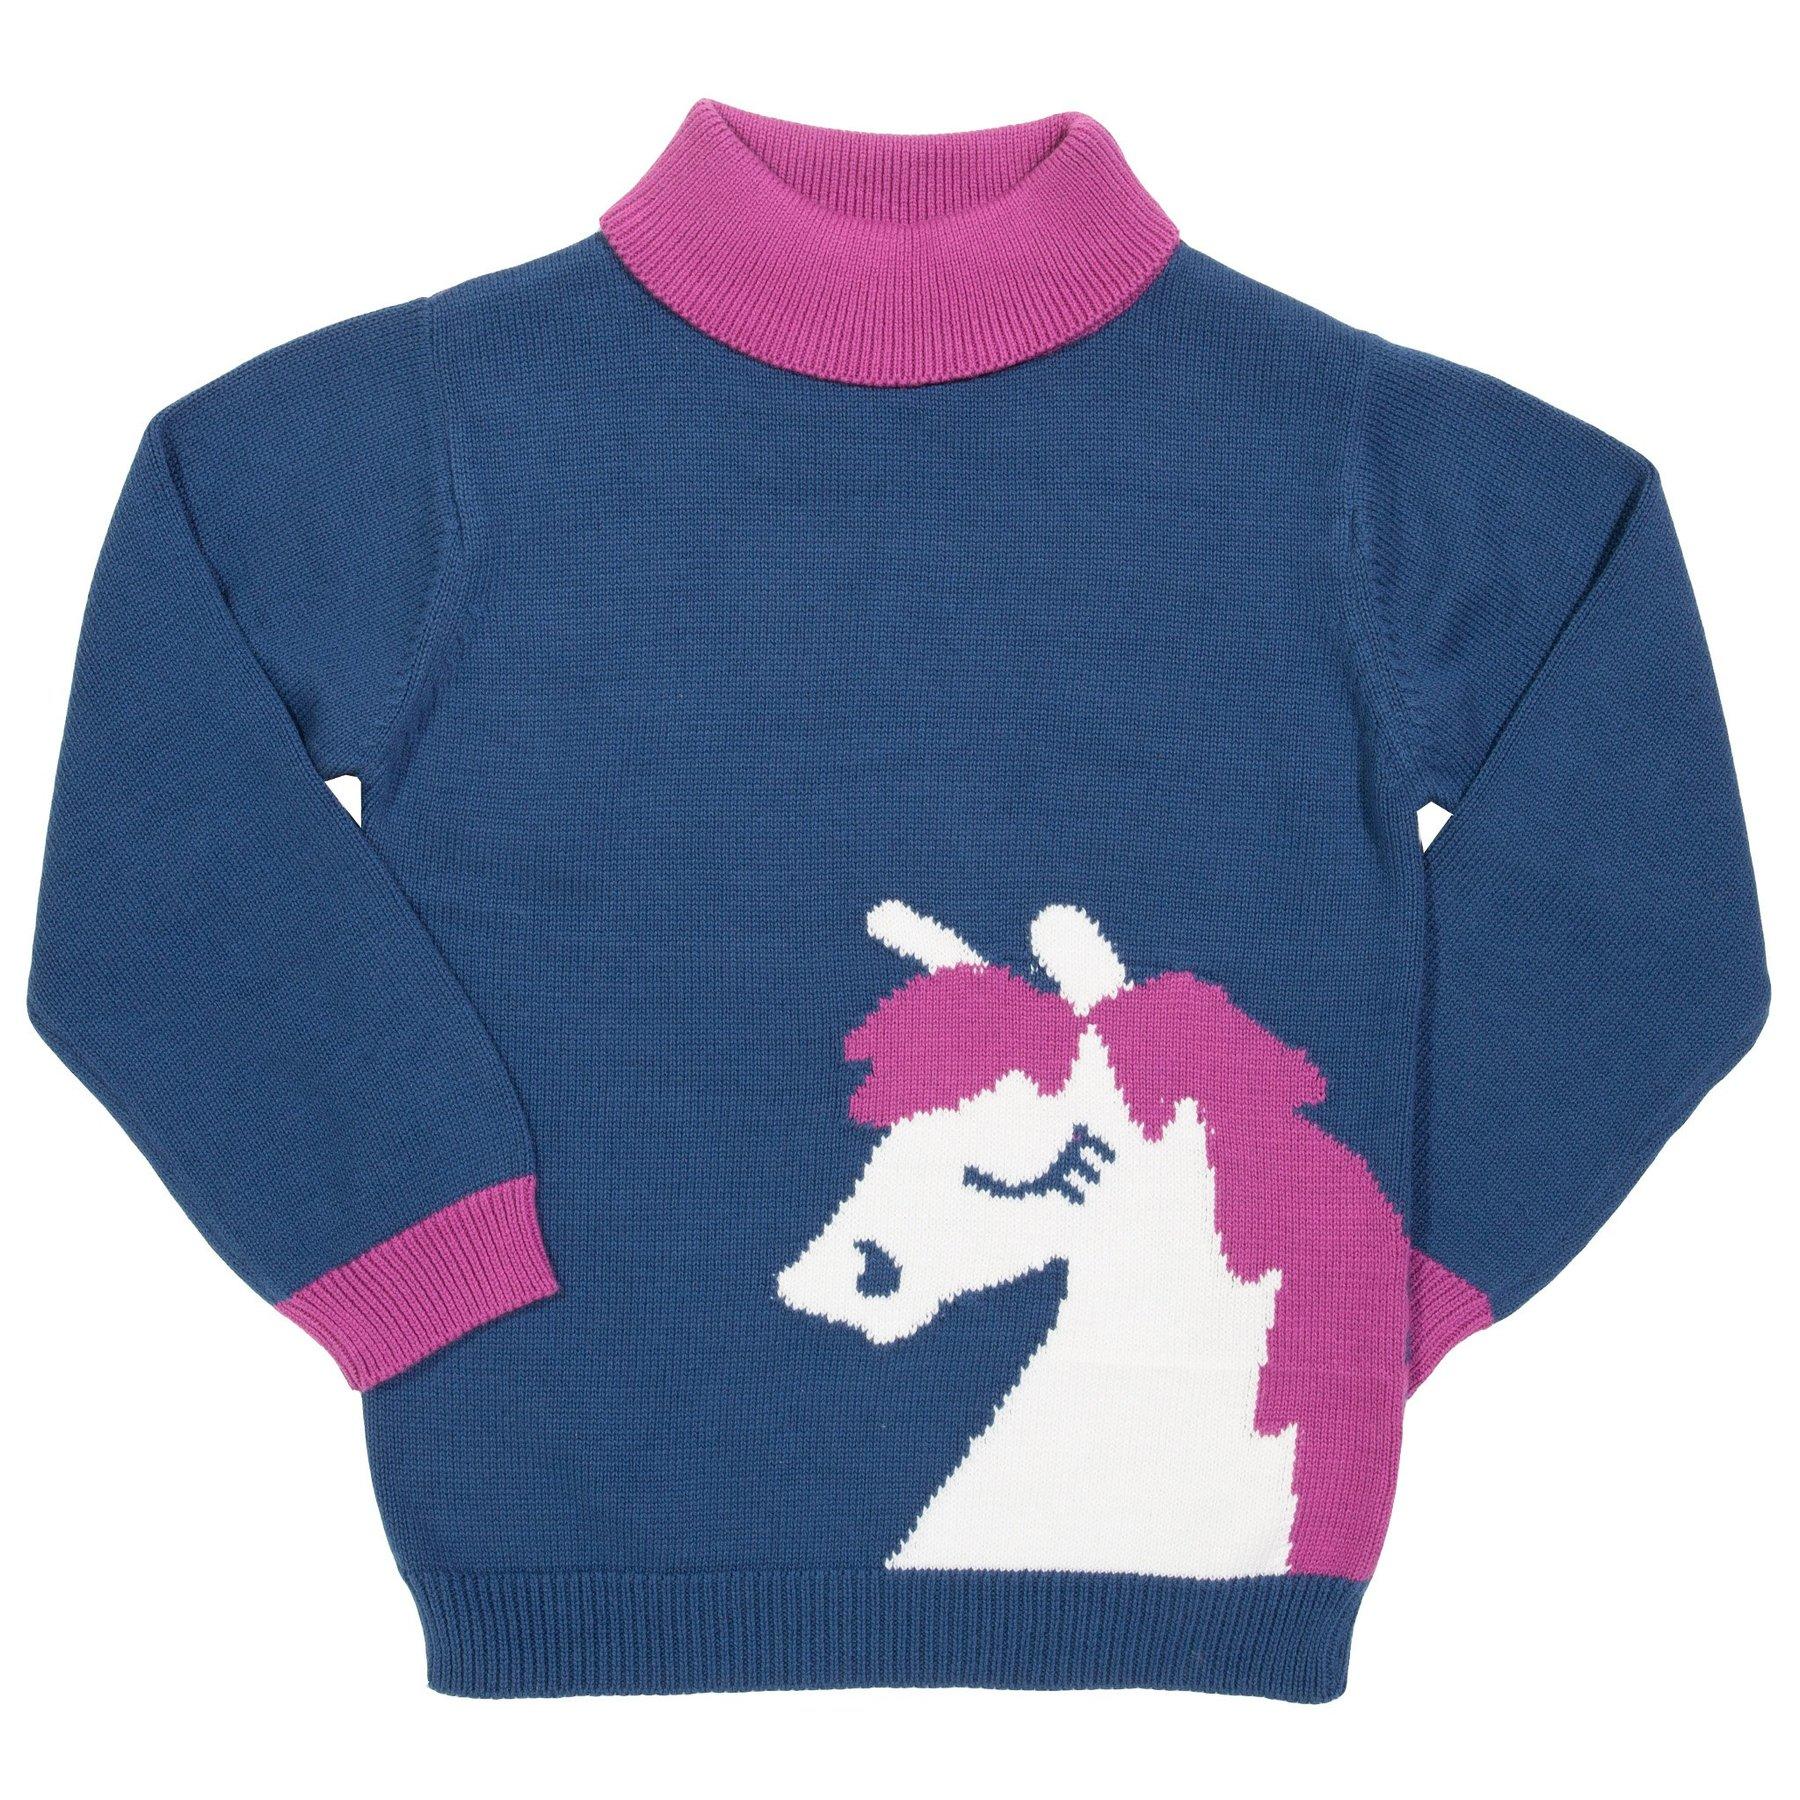 Kite Clothing Fairy Tale Jumper front